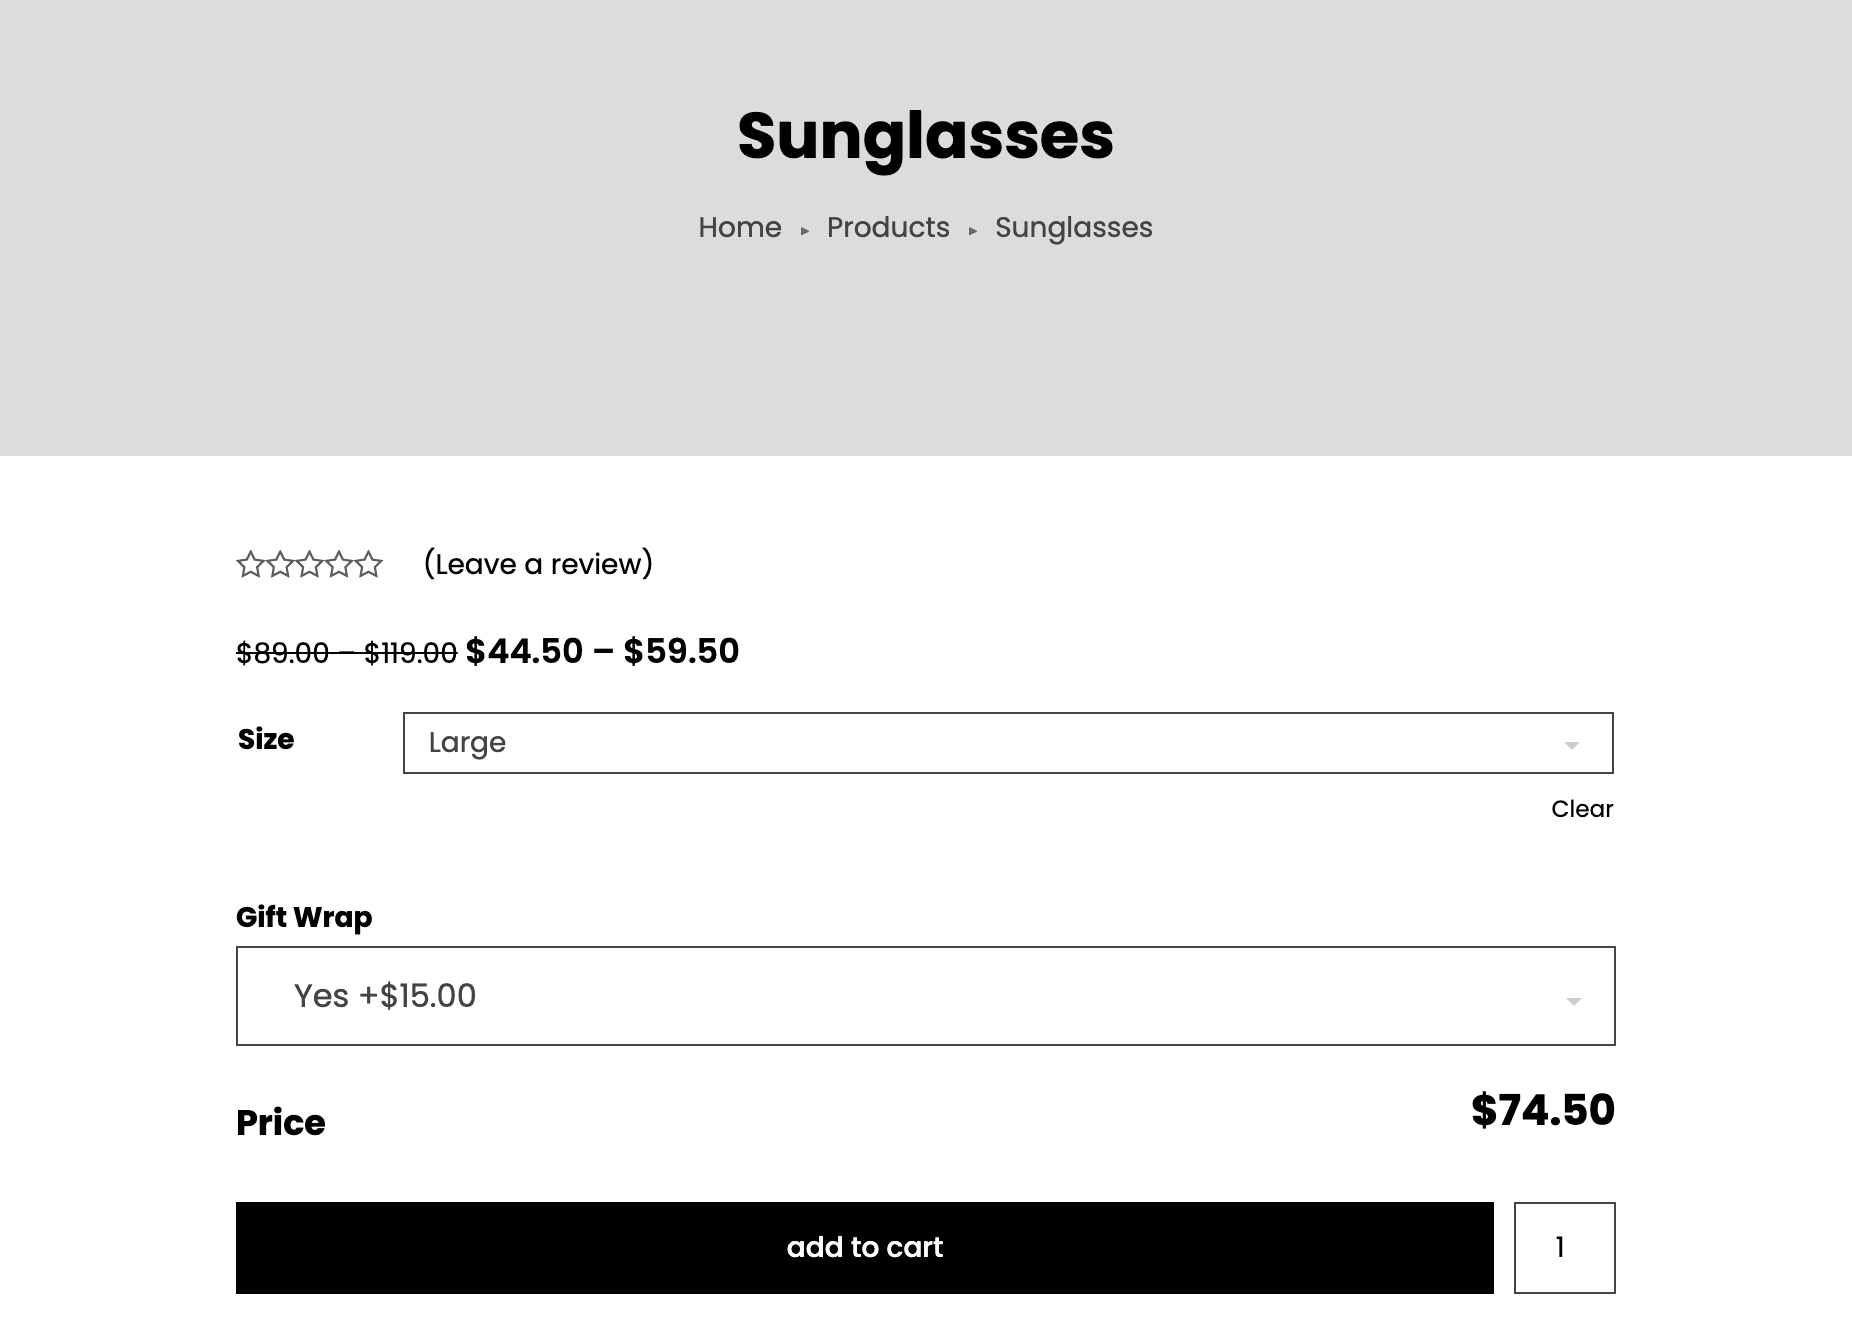 Single Product page with strikethrough pricing and a live update price that reflects the sitewide discount